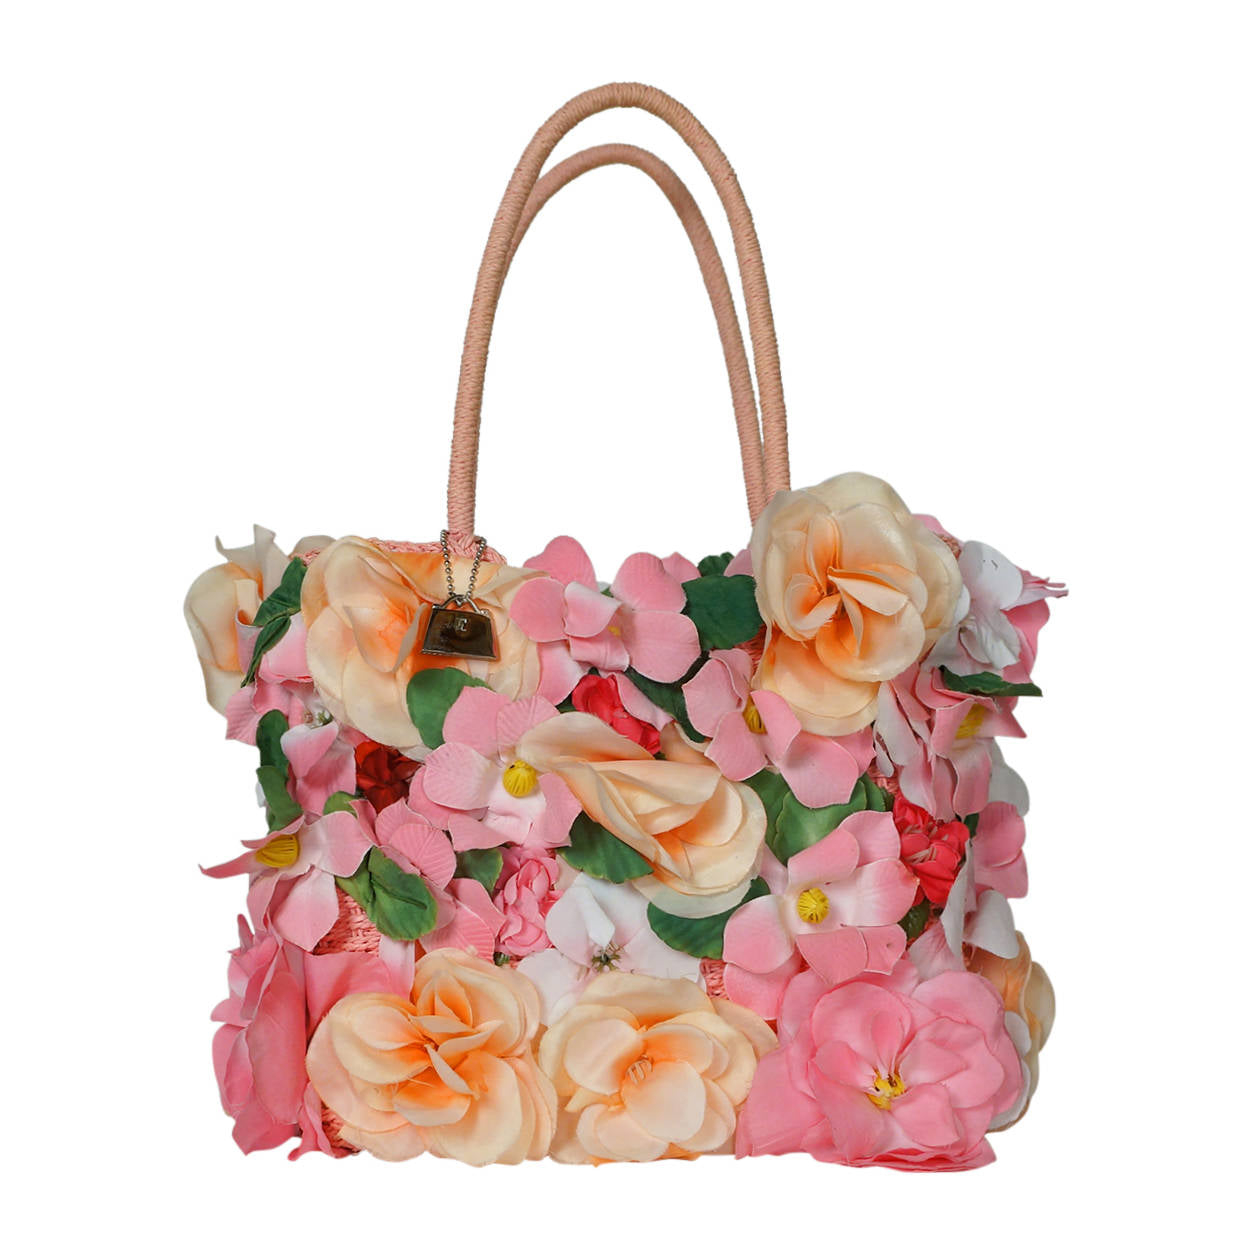 Send elegant white womens purse in butterfly print to Delhi, Free Delivery  - DelhiOnlineFlorists